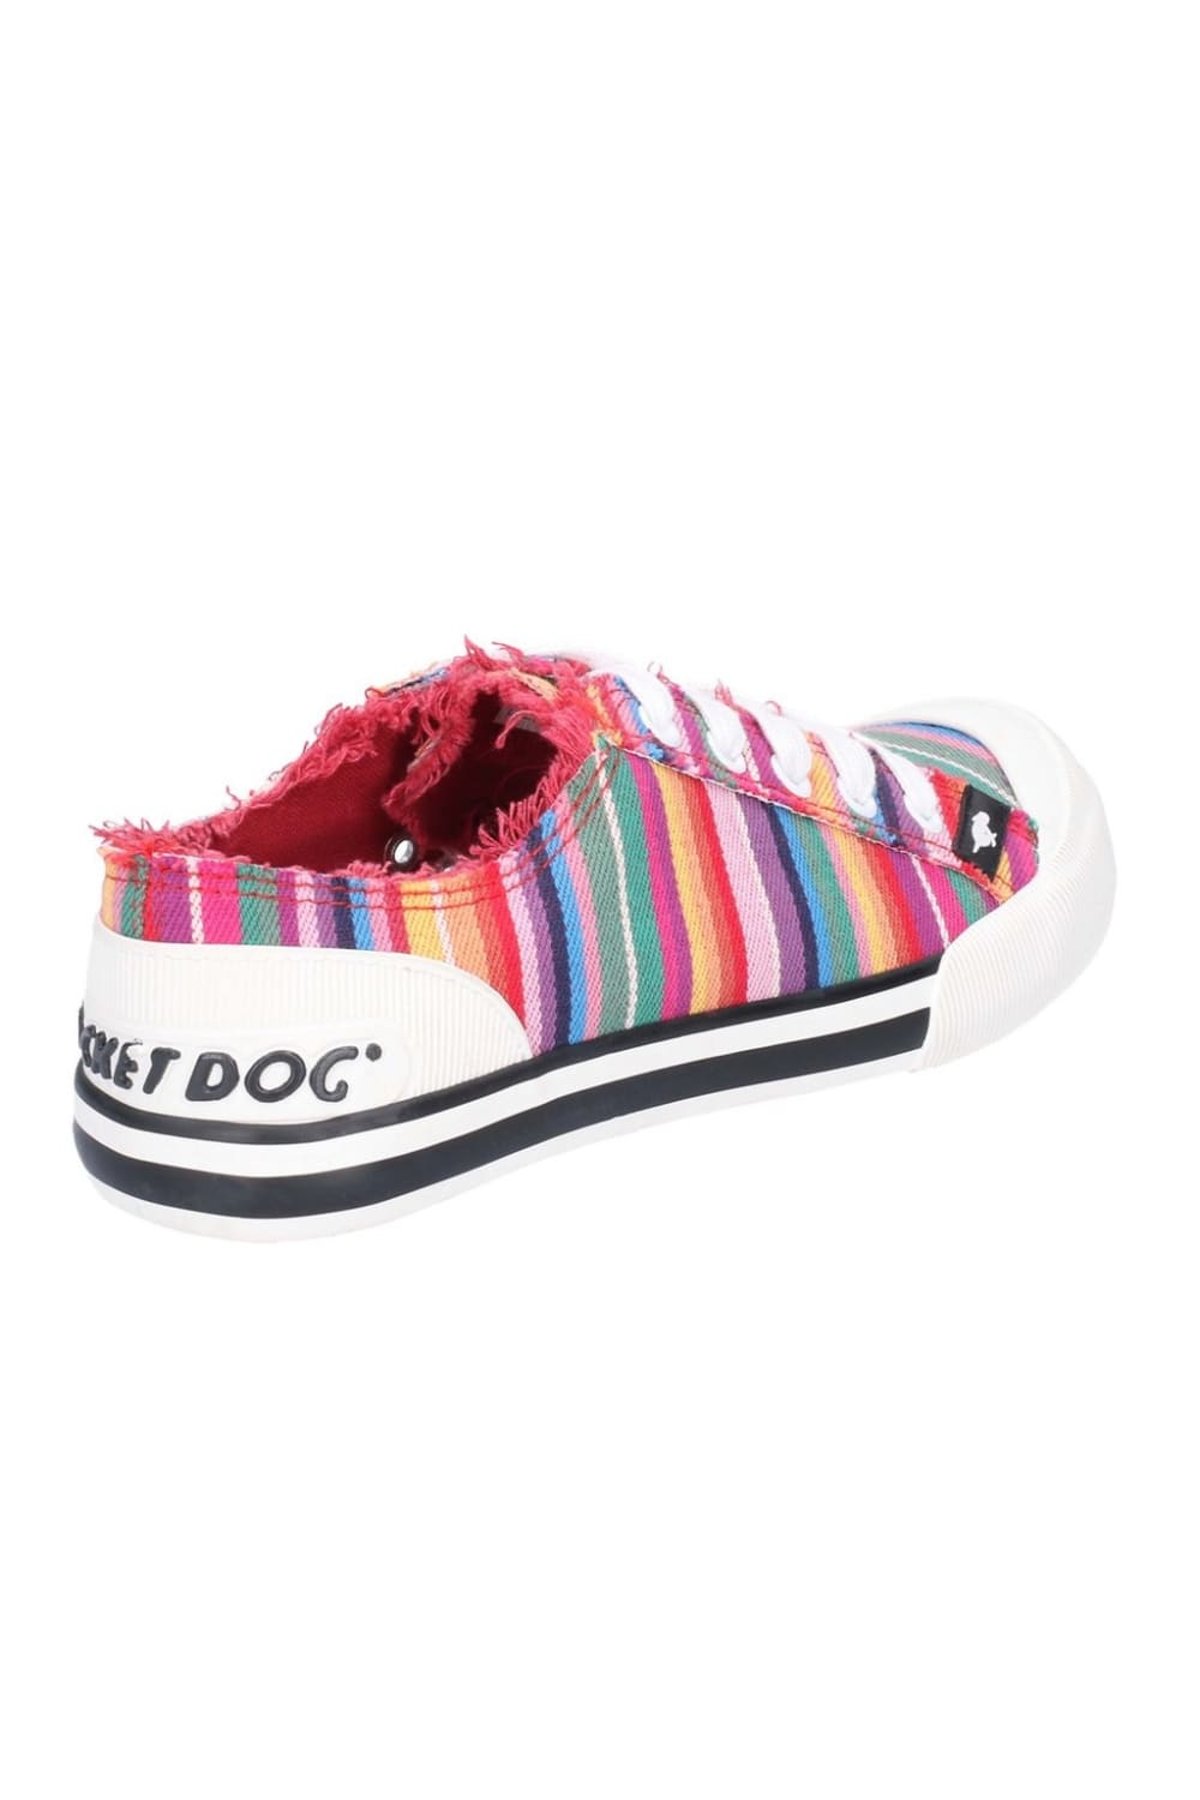 Rocket Dog Women's Jazzin Lace Up Casual Shoes